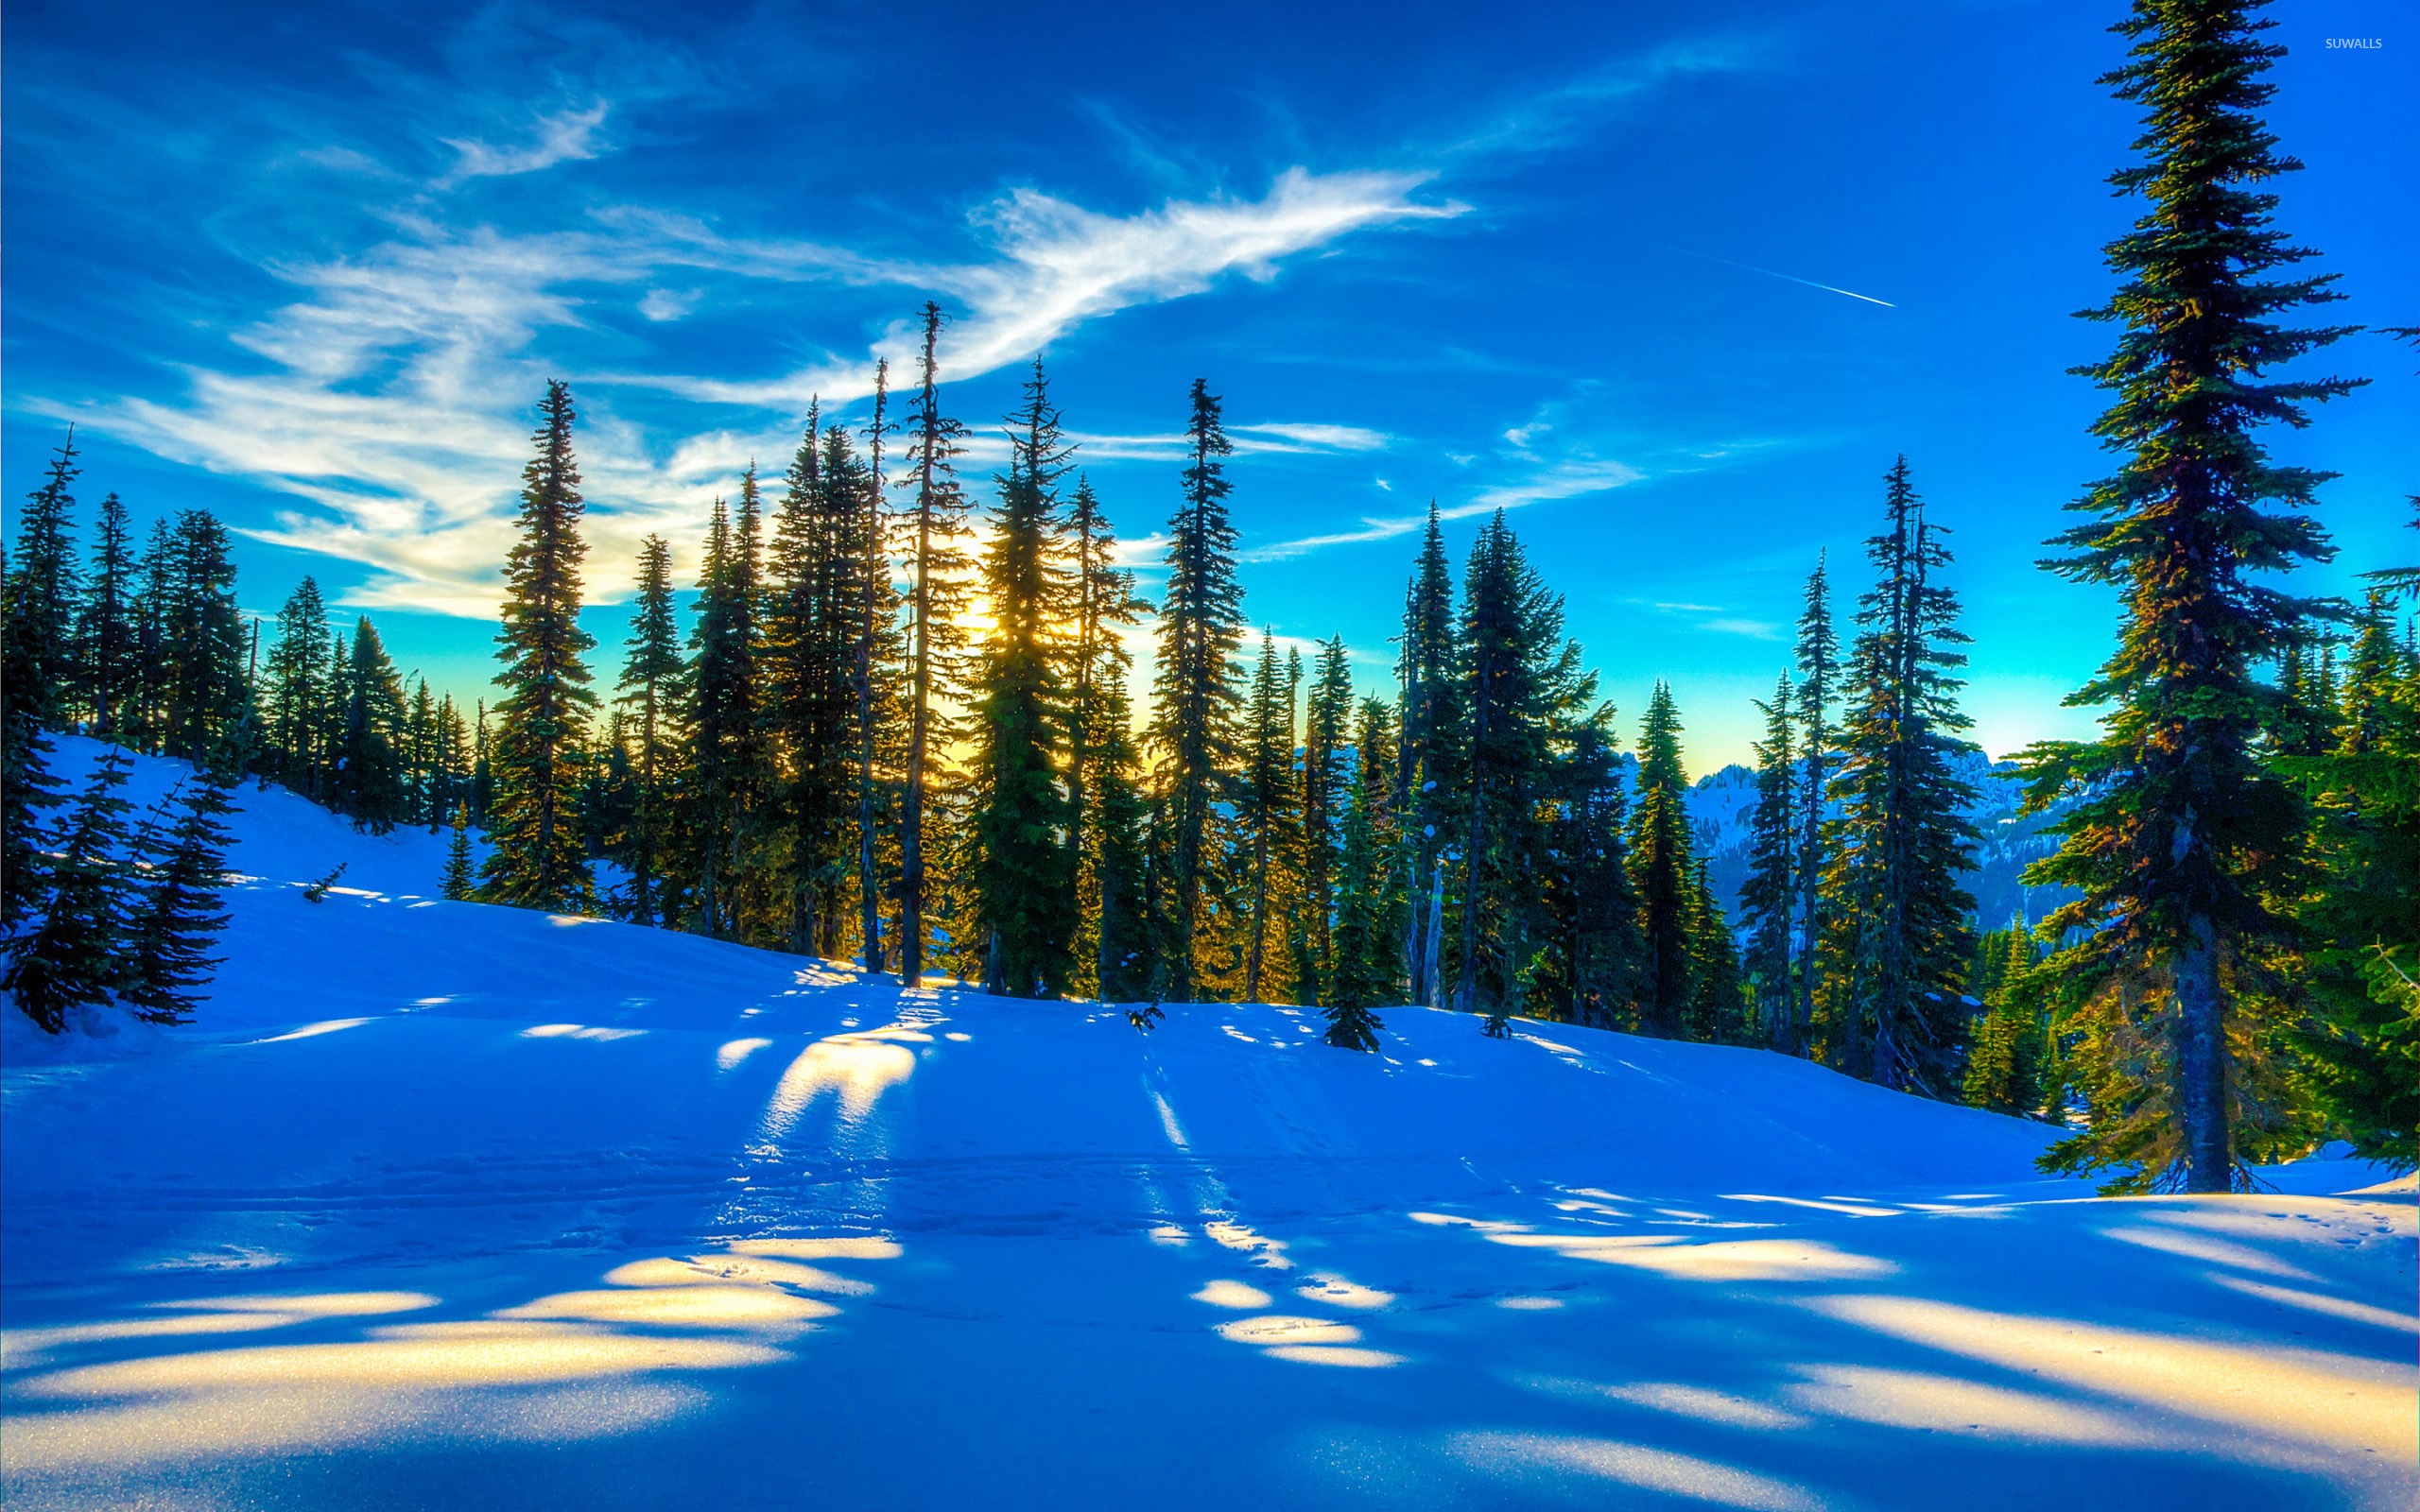 Sunlight reflecting in the snow wallpaper - Nature wallpapers - #48019